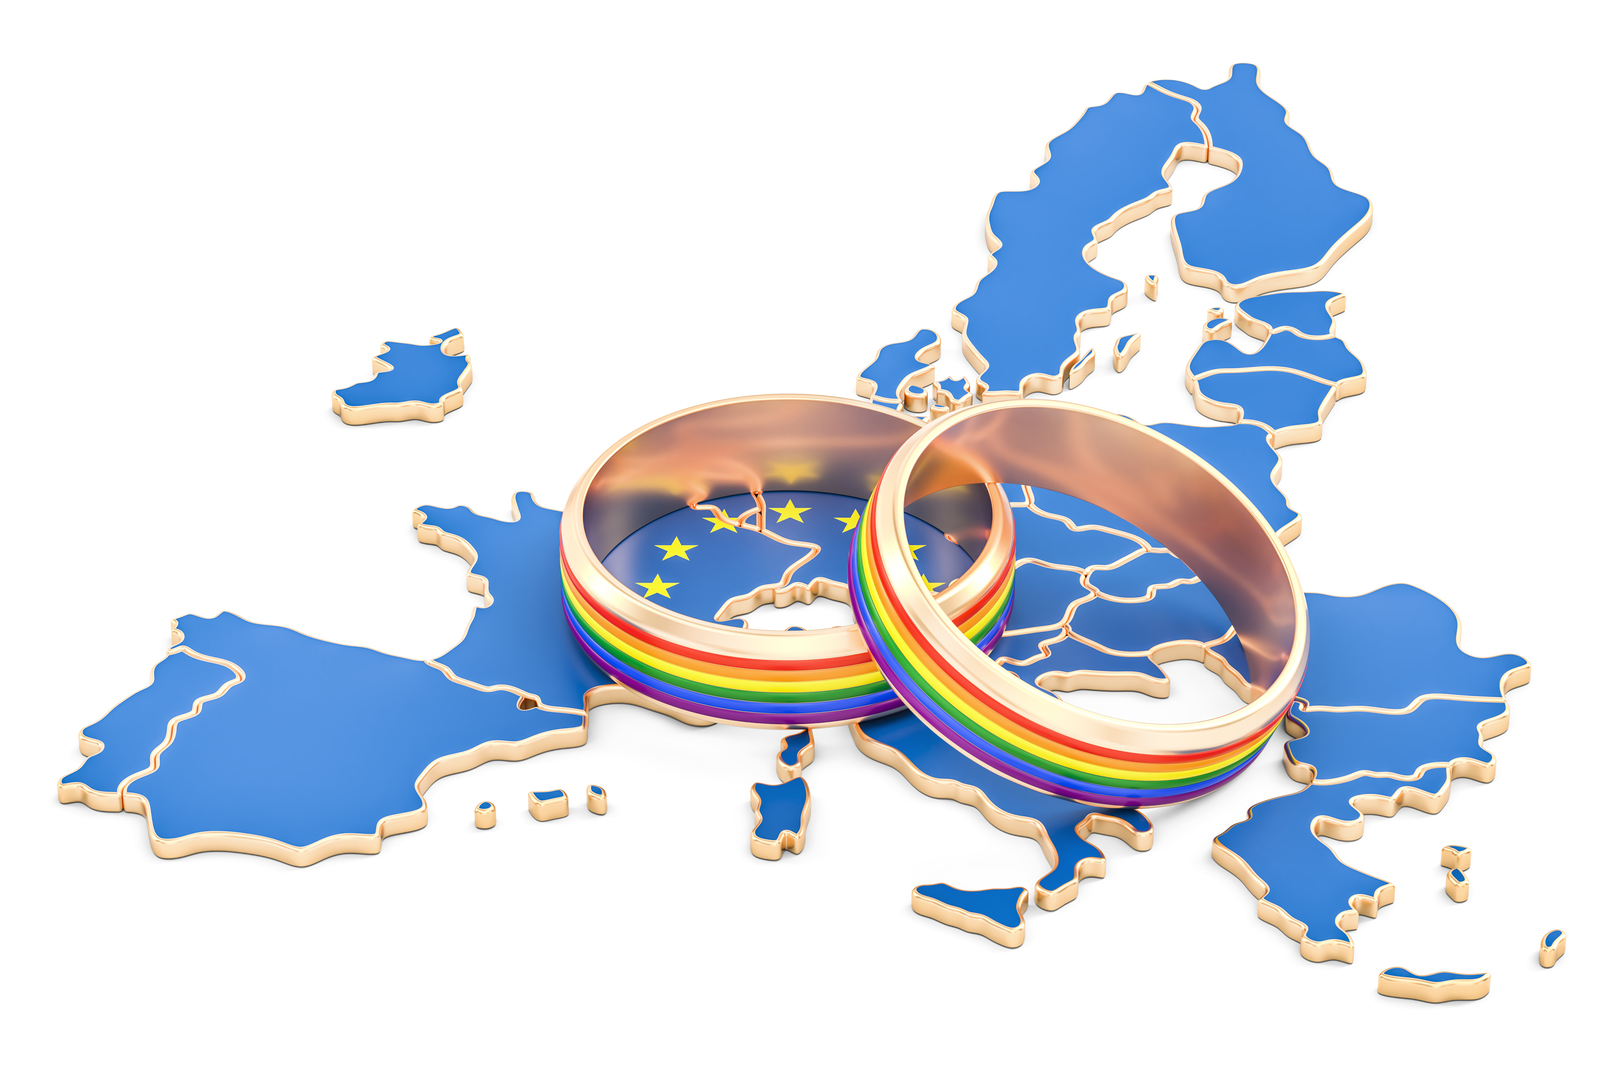 European Union Countries Must Recognize European Union Citizens&#8217; Same-Sex Spouses&#8217; Right to Live and Work Across Member Countries